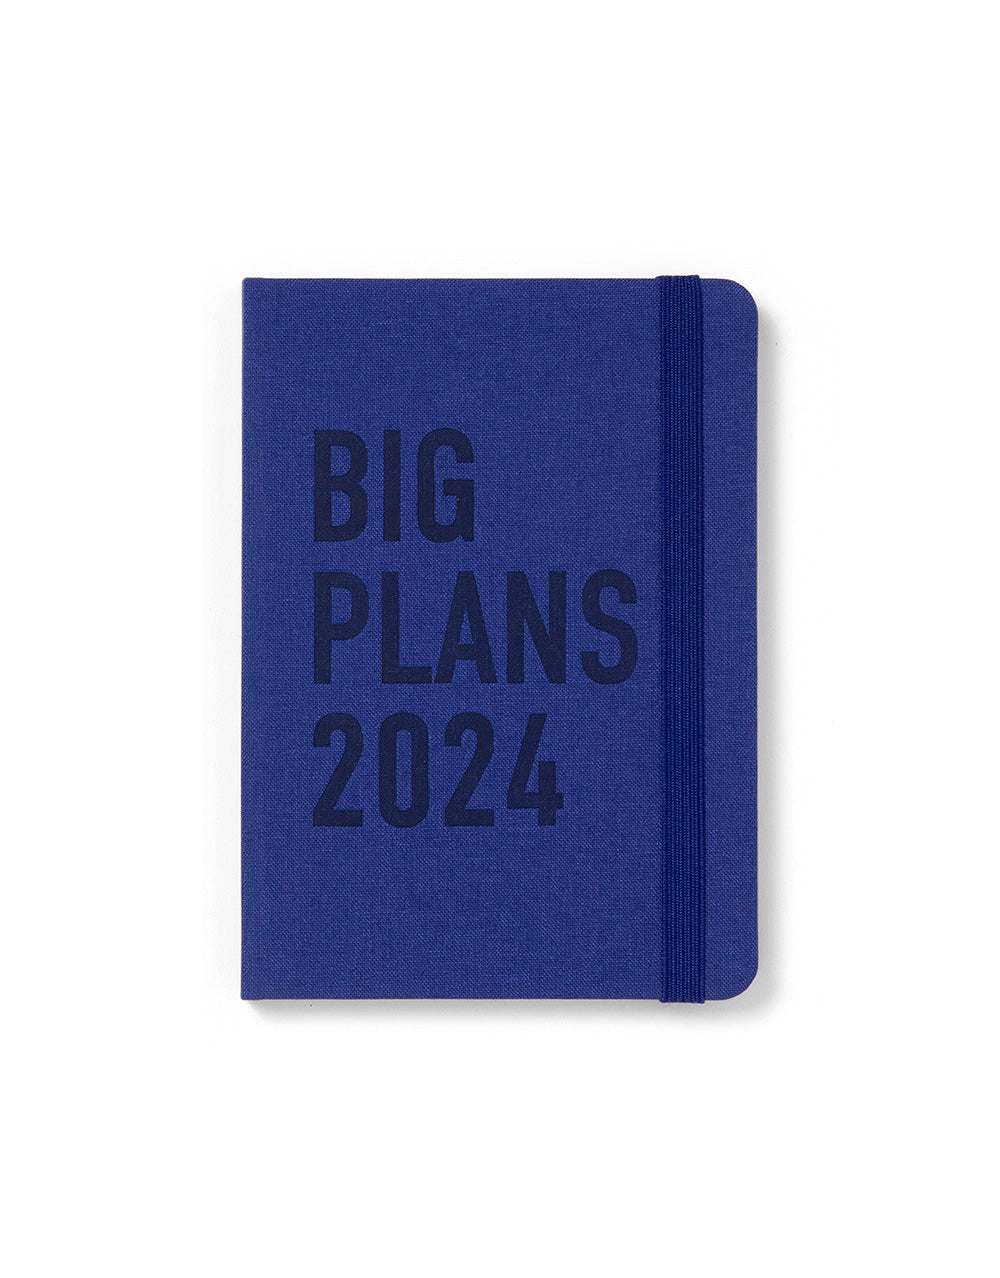 Big Plans A6 Diary 2024 - Multilanguage, Week to view